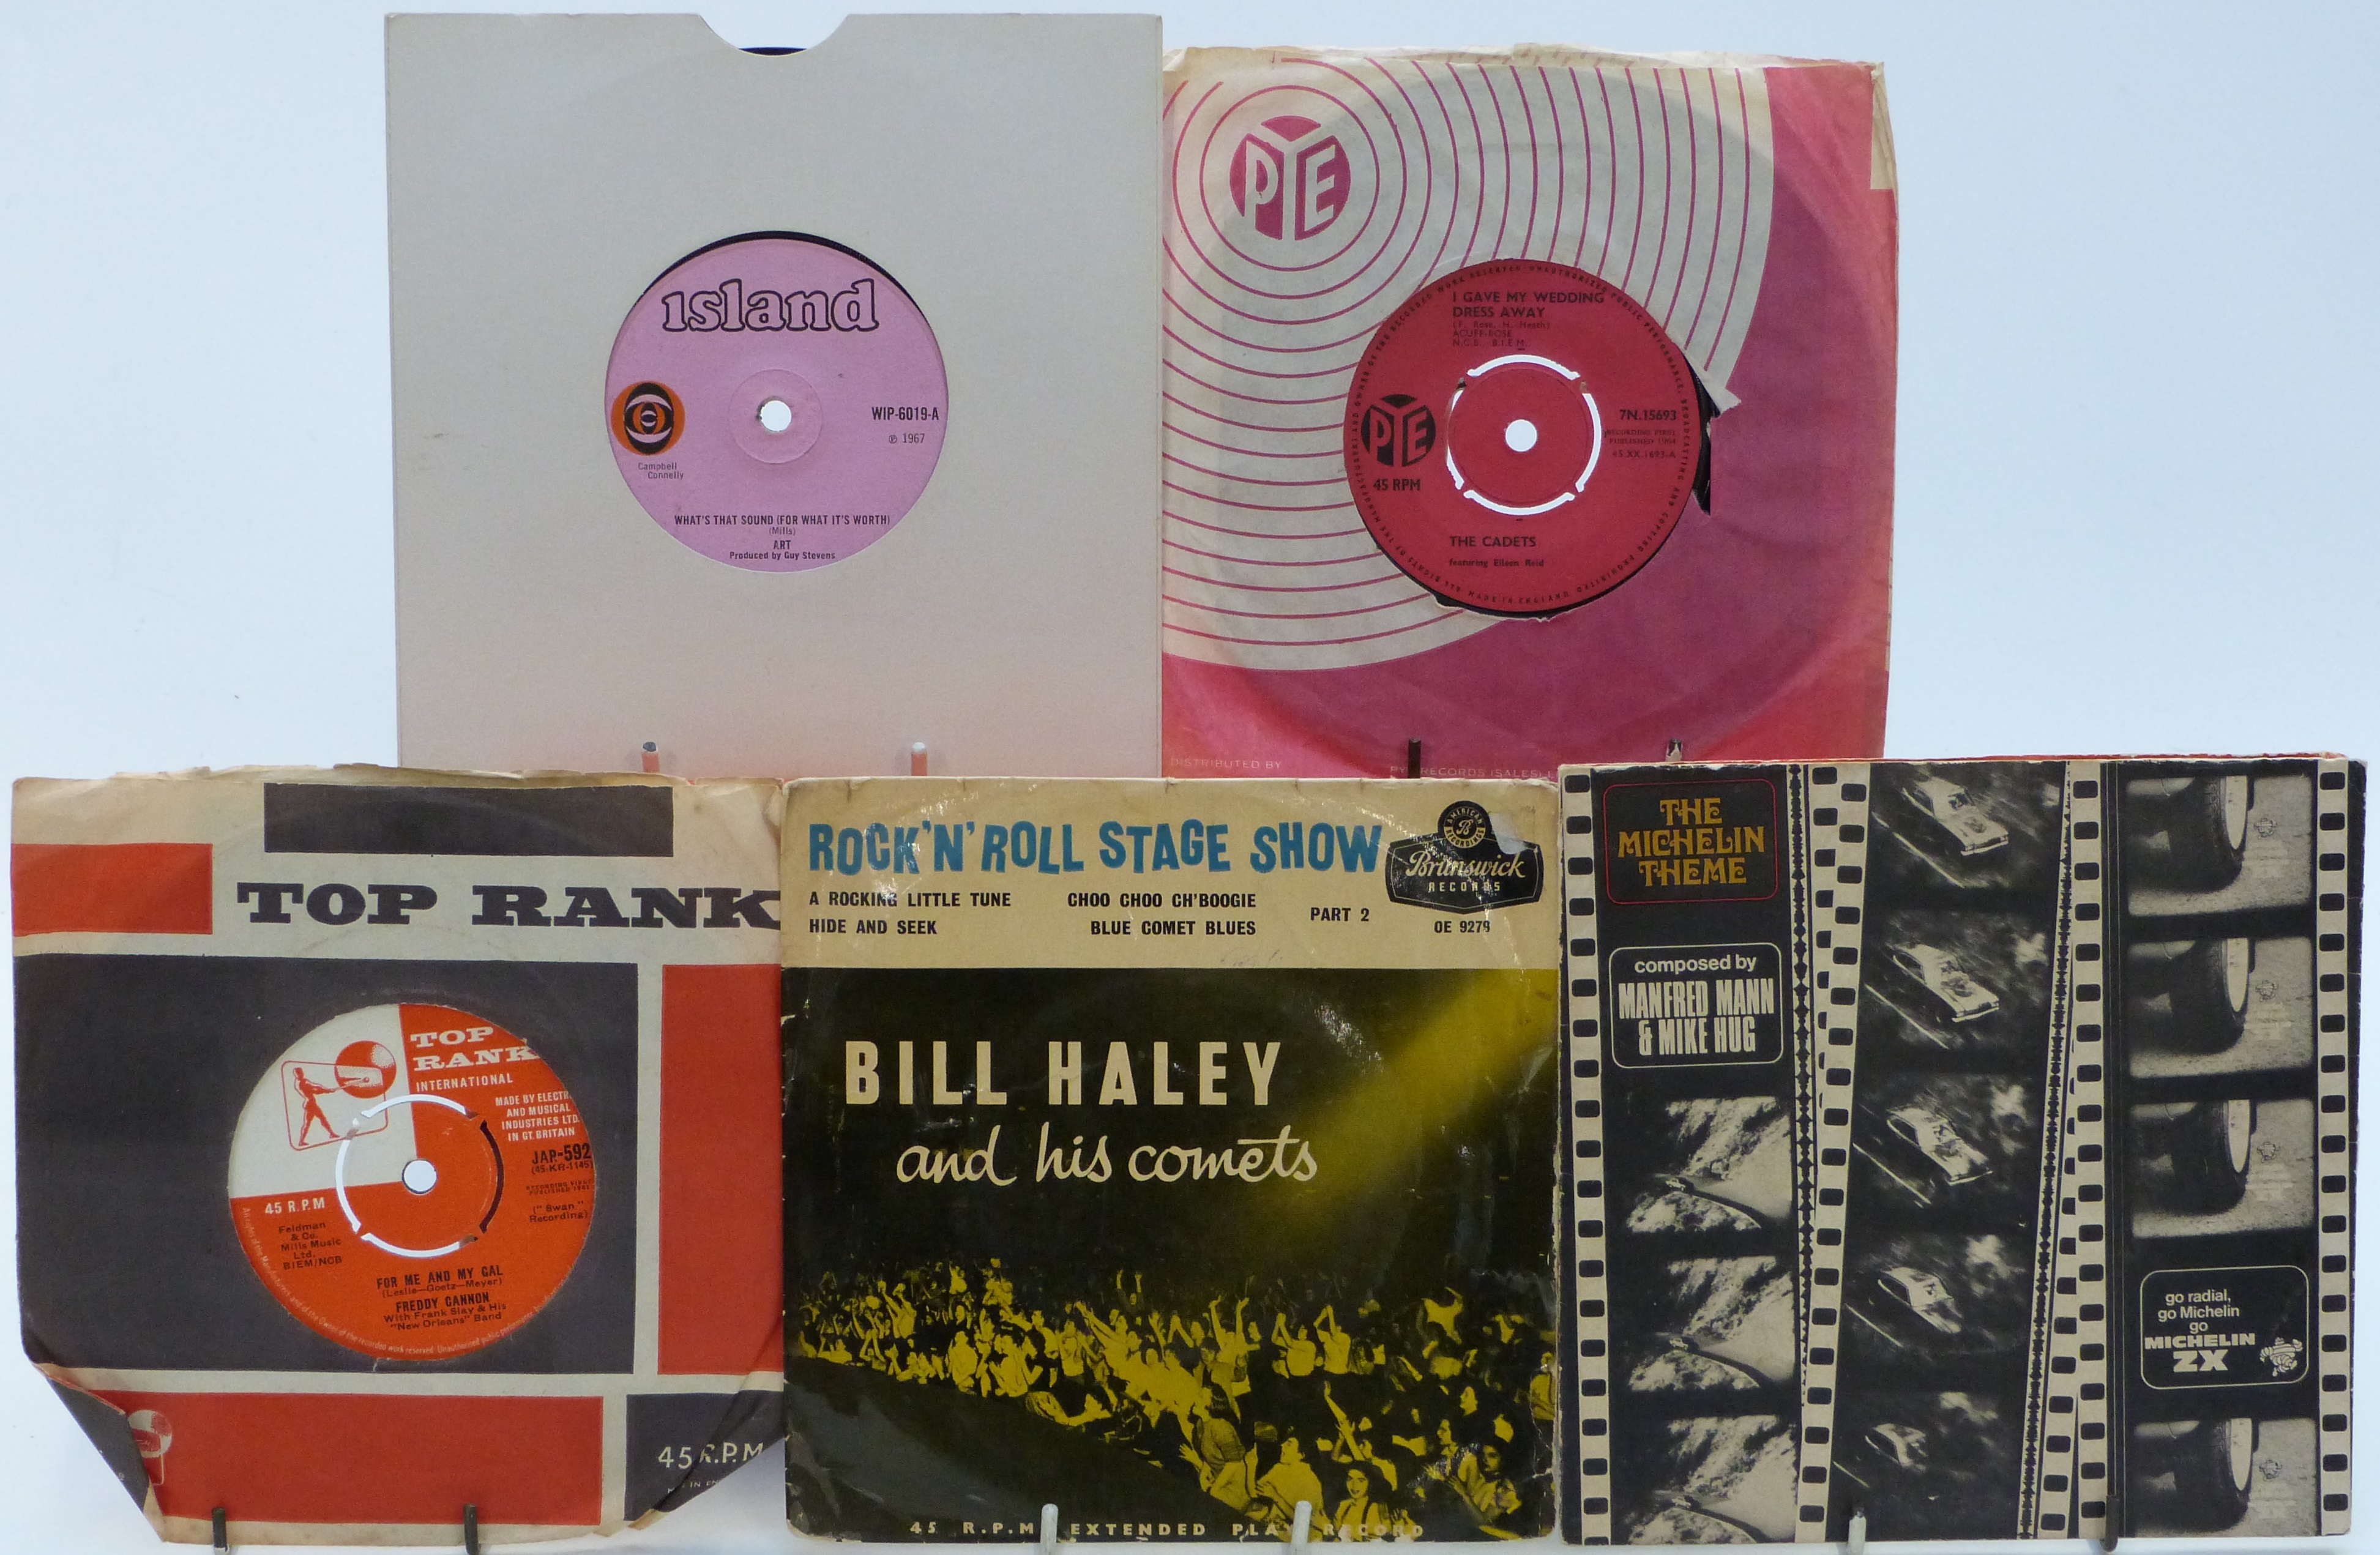 Approximately 300 singles including Bill Haley, Gary Lewis, Ron Goodwin, Dave Brubeck, Freddie